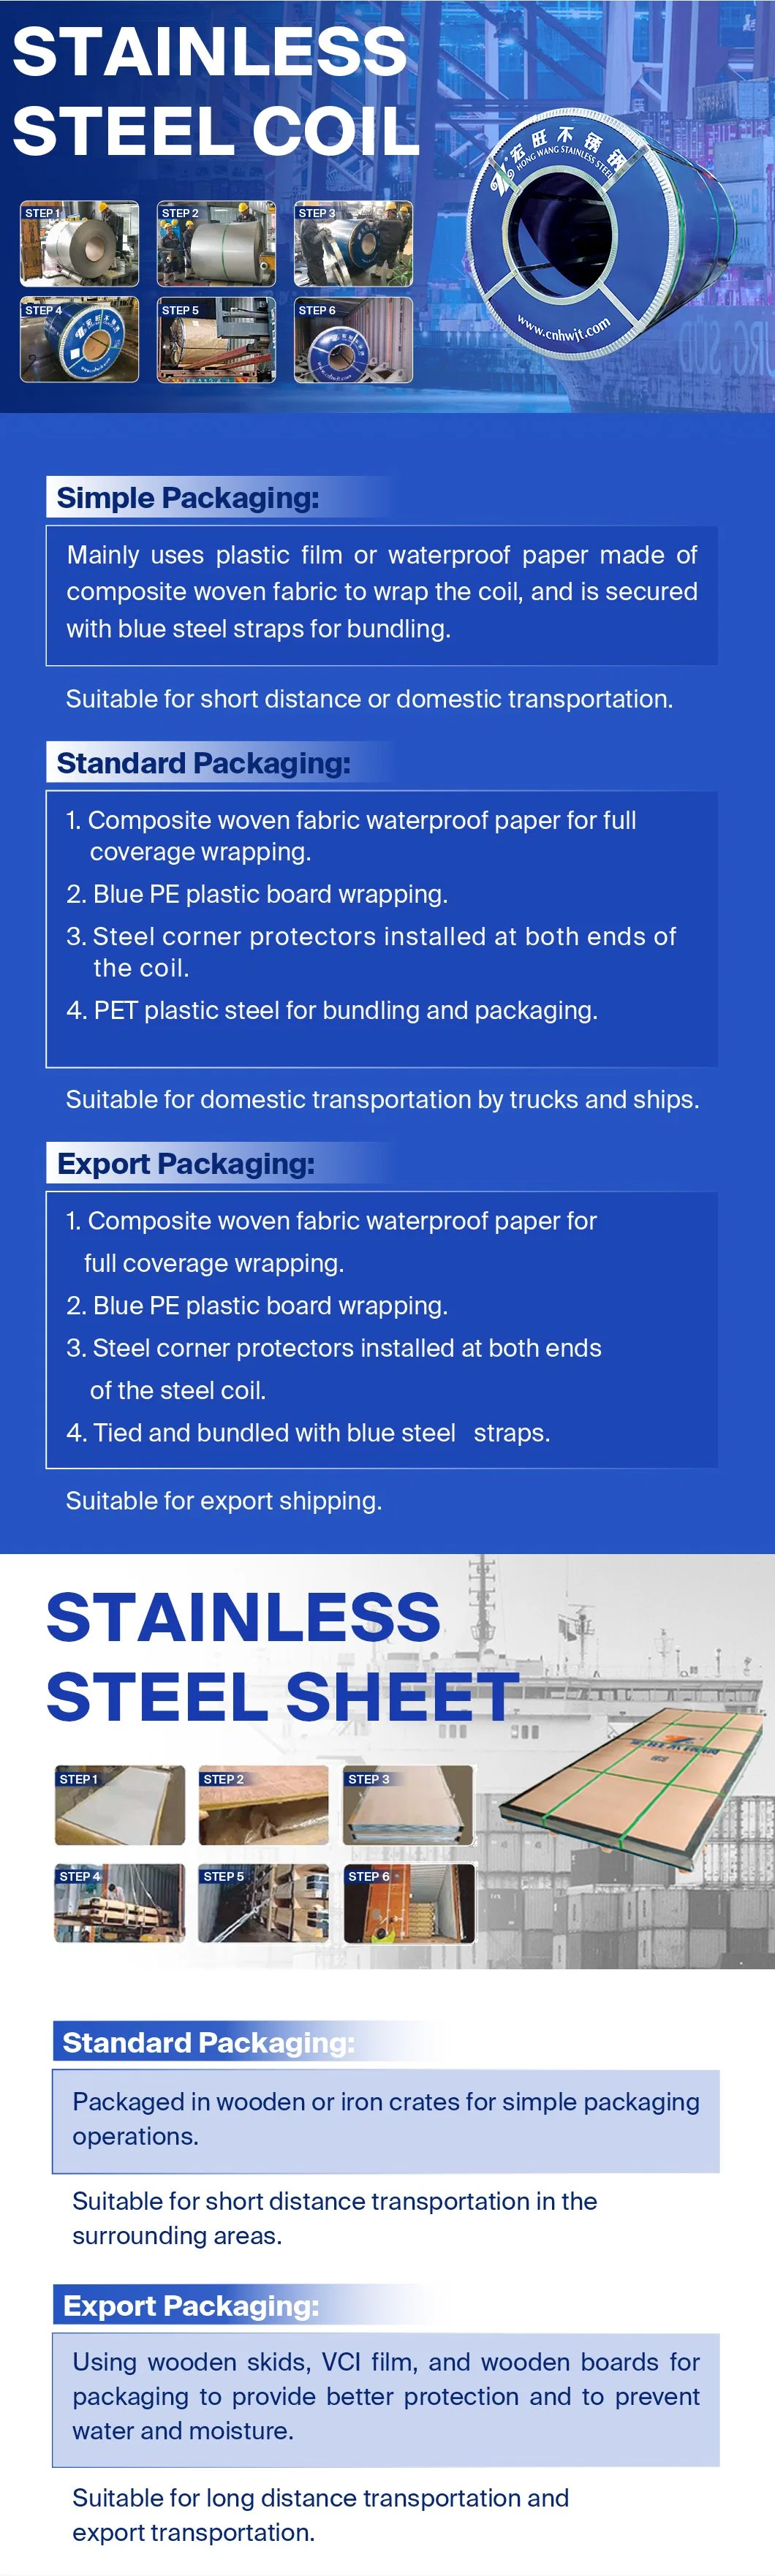 China Manufacturer Silicon Steel Coil Strip CRGO CRNGO Cold Rolled Oriented Electrical Steel Coil Non-Grain Oriented Silicon Transformer Steel